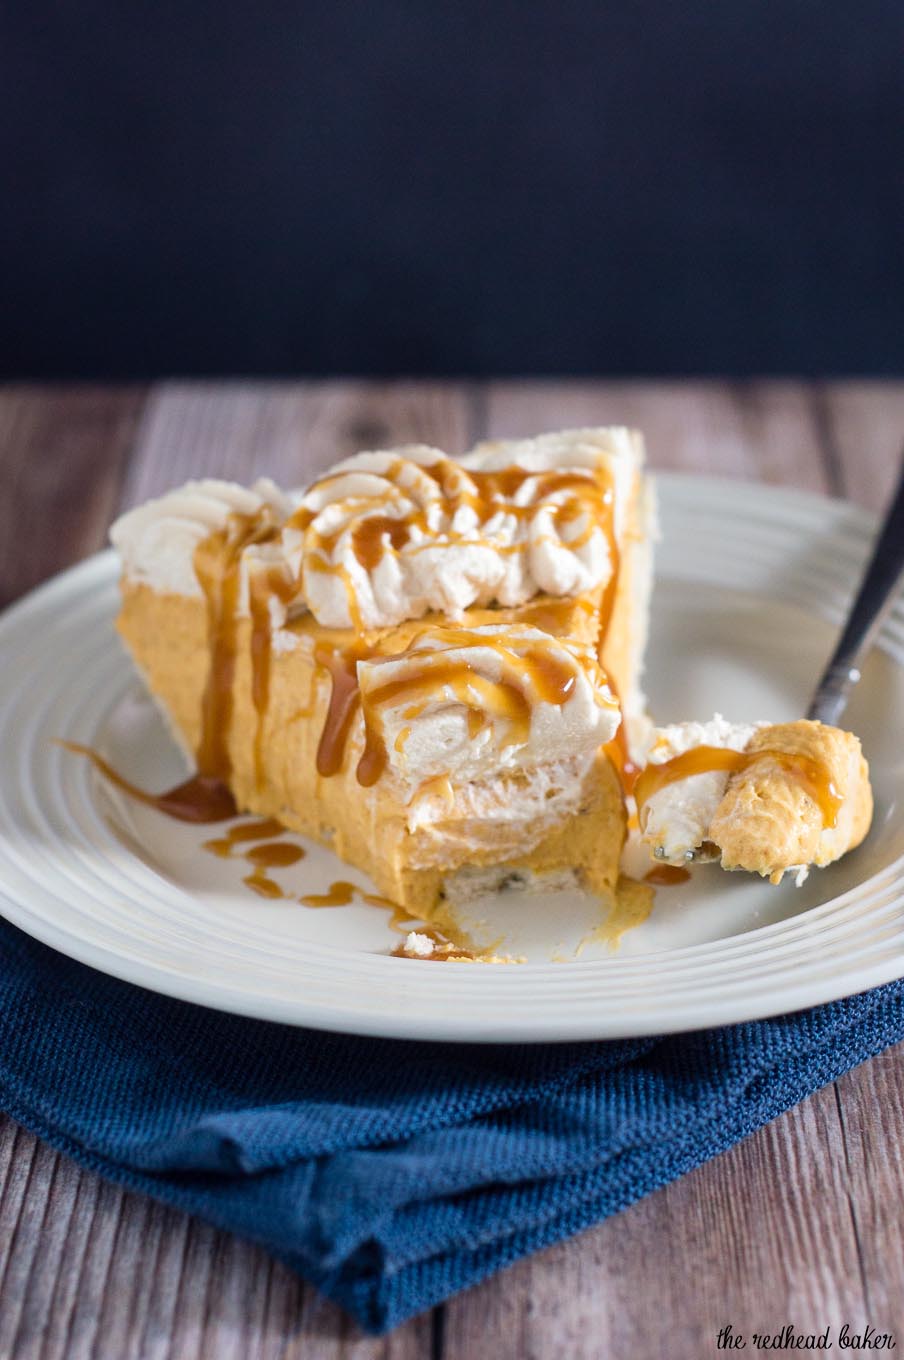 Pumpkin cream pie has all the flavor of classic pumpkin pie with a slightly different texture. It's topped with decadent salted caramel whipped cream.